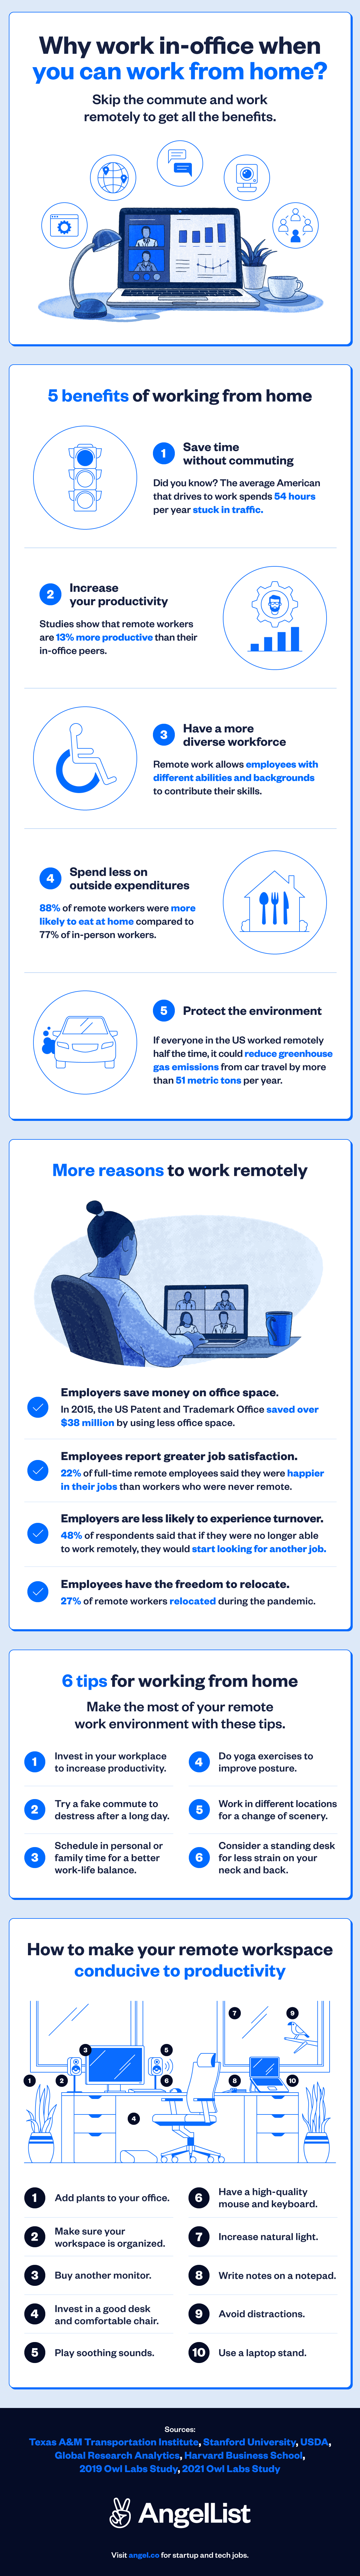 Working From Home vs. Office: 7 Pros & Cons to Consider